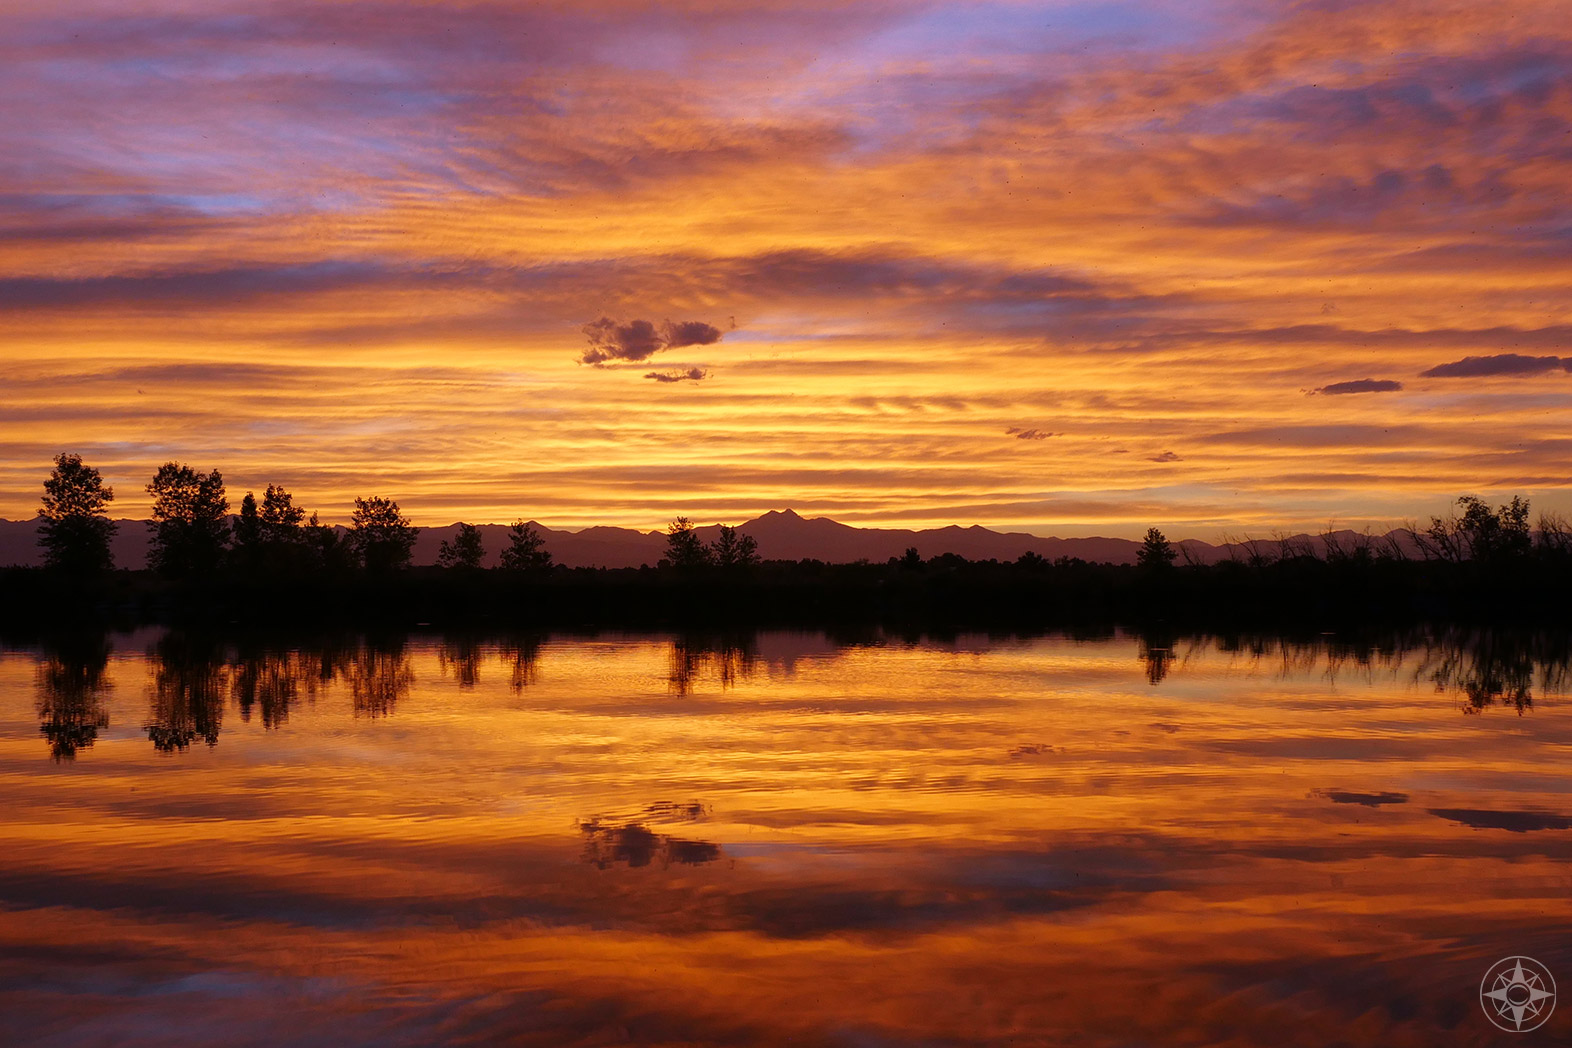 Rocky Mountain Sunset Reflection in Coot Pond in St. Vrain State Park, Colorado